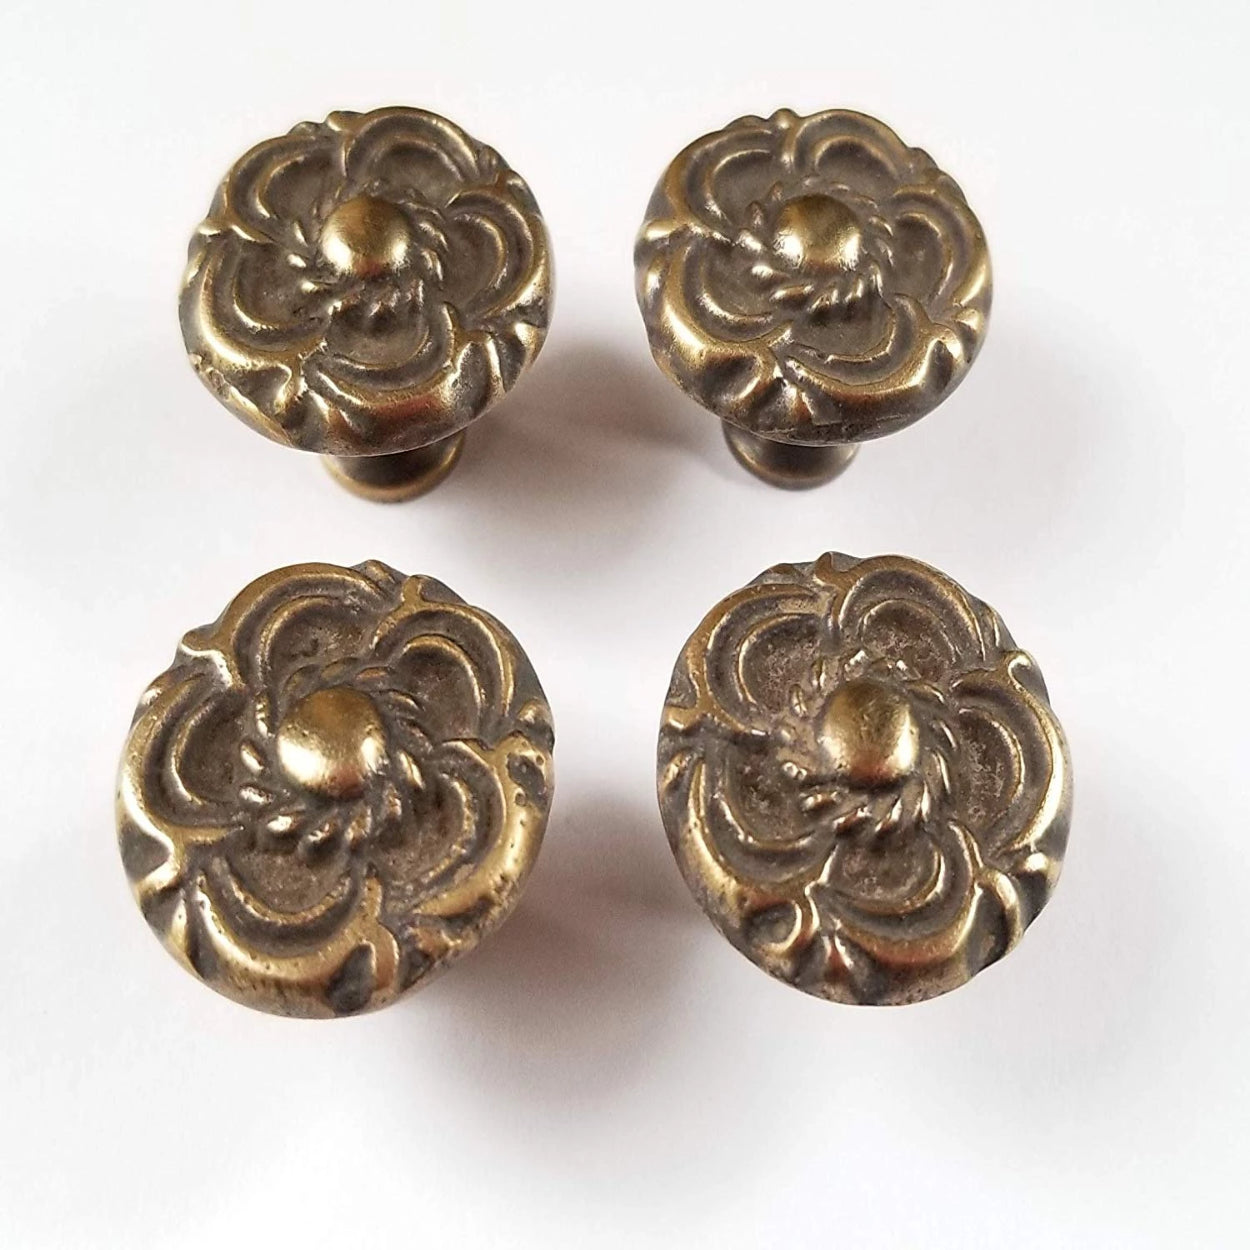 4 Antique Vintage Style French Provincial Brass Floral Knobs Pulls Handles #K19